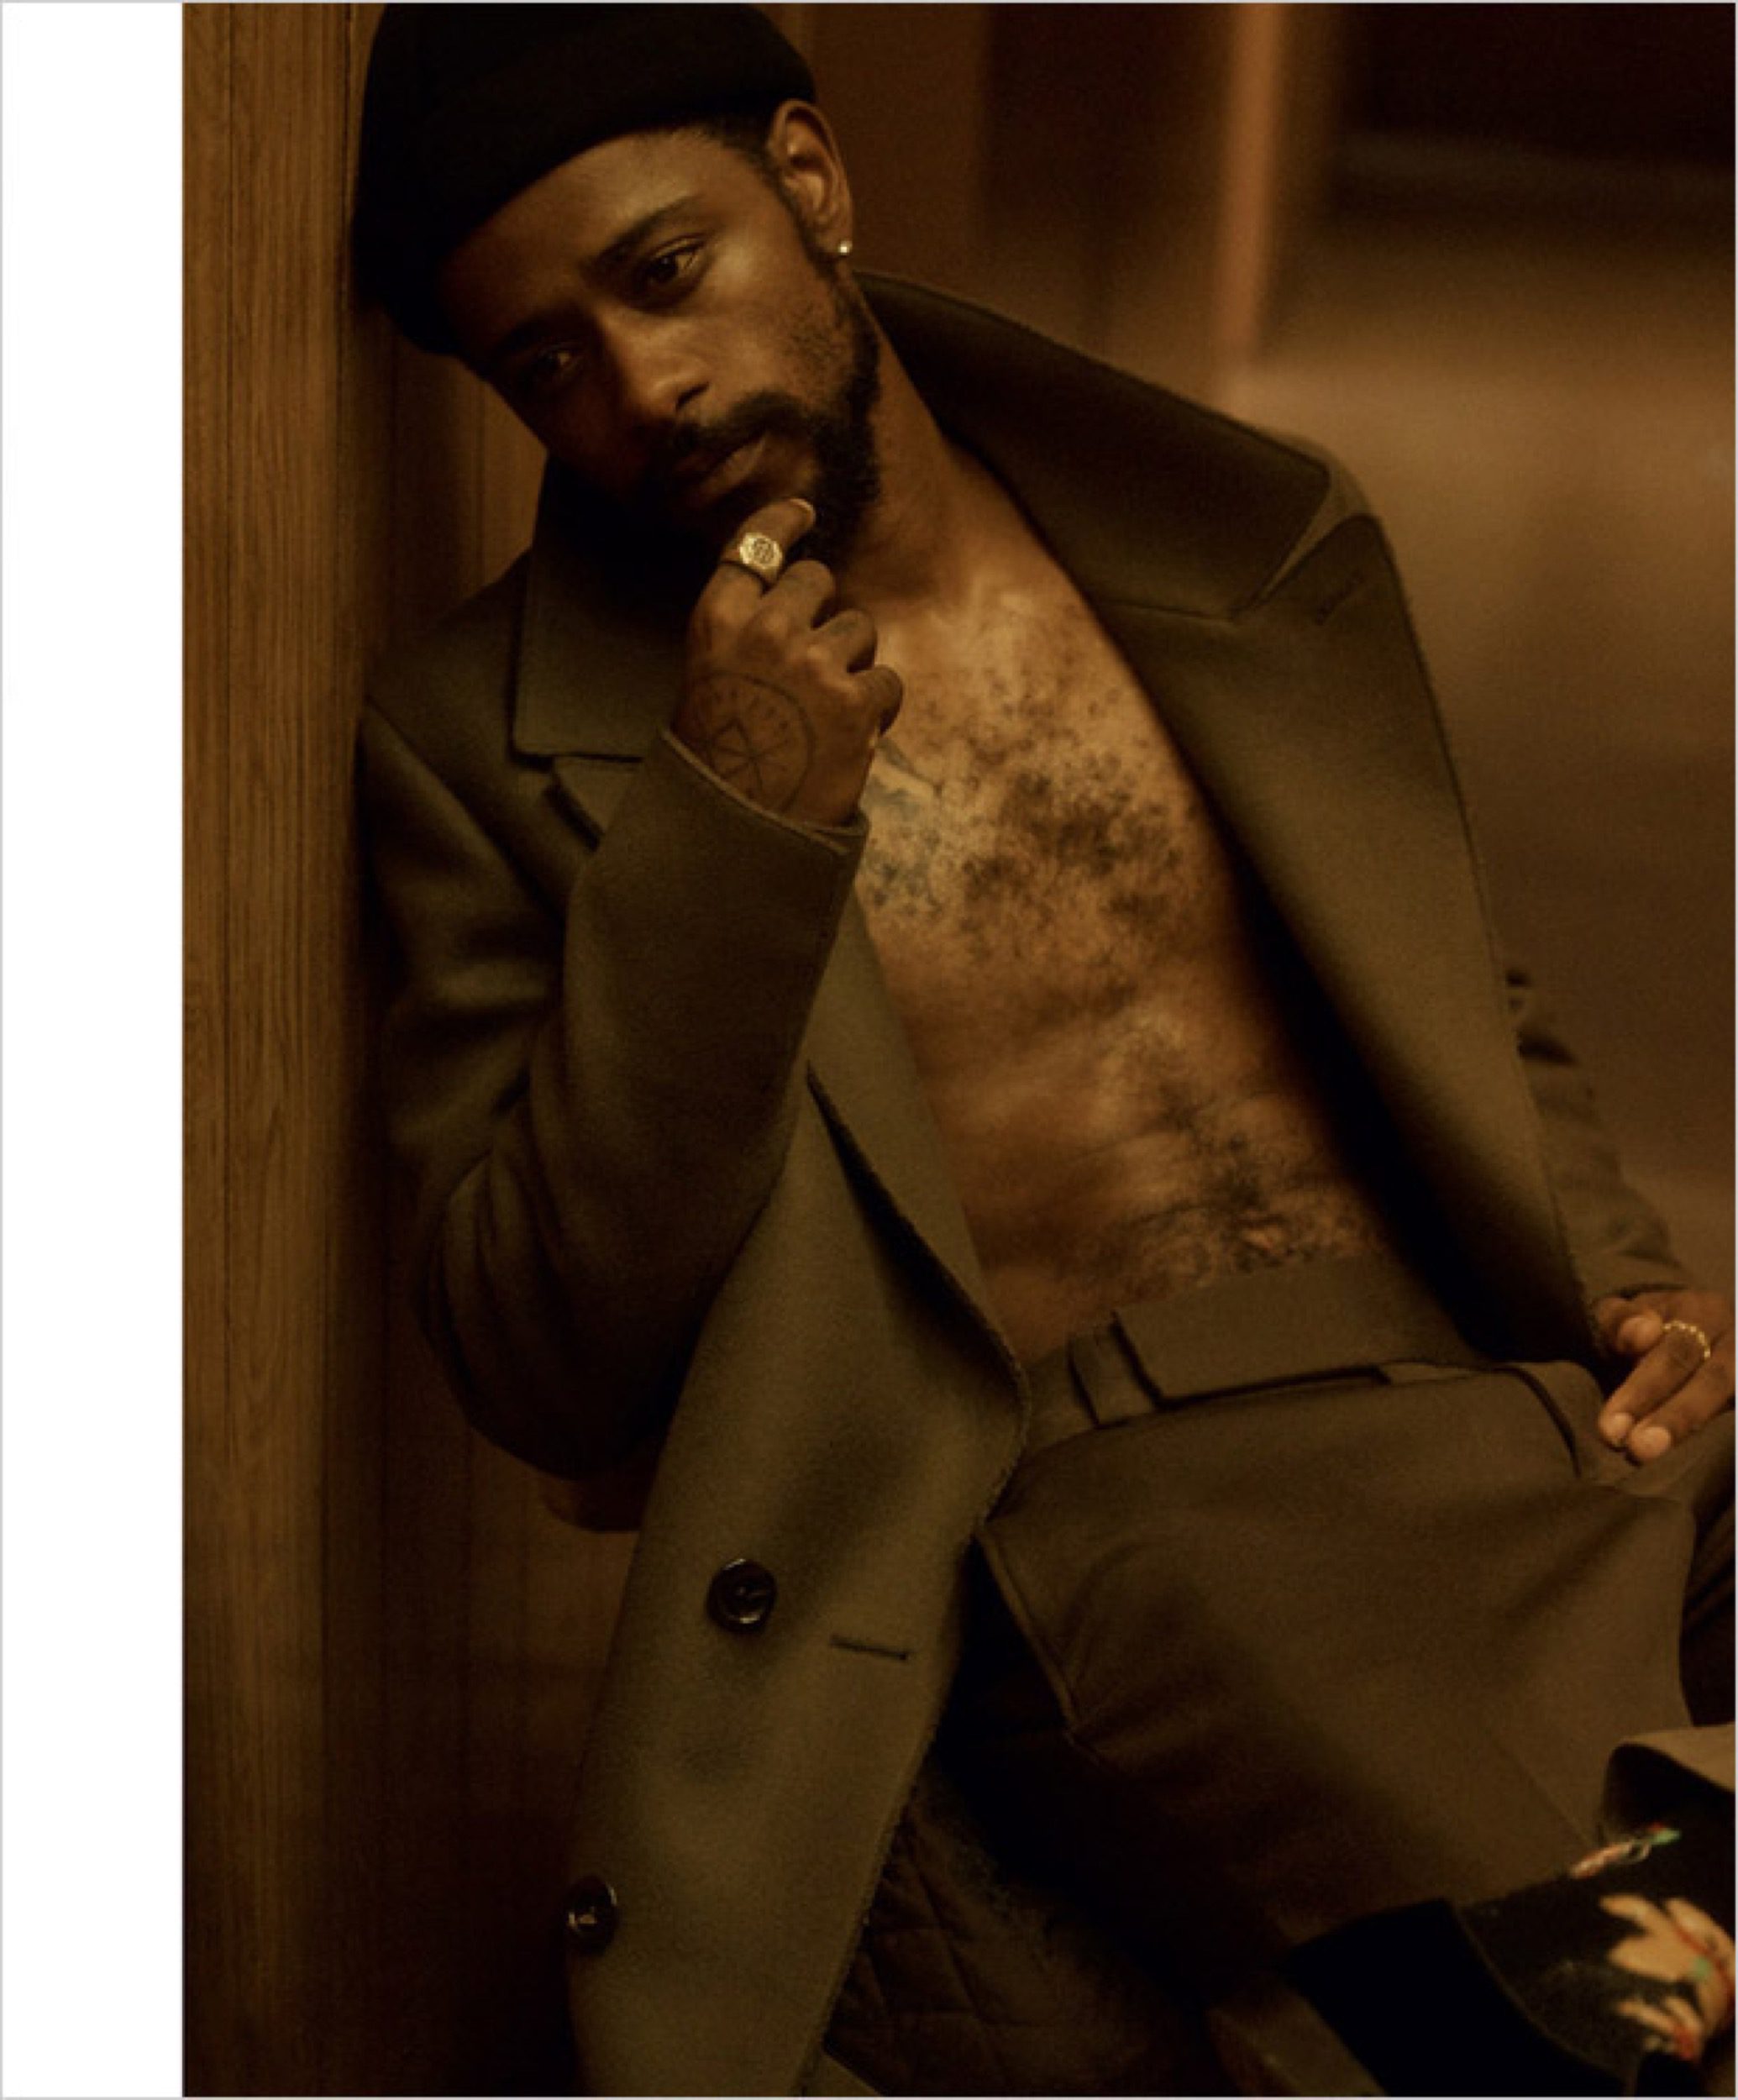 kathrin-hohberg-essential-homme-lakeith-stanfield-david-roemer-08